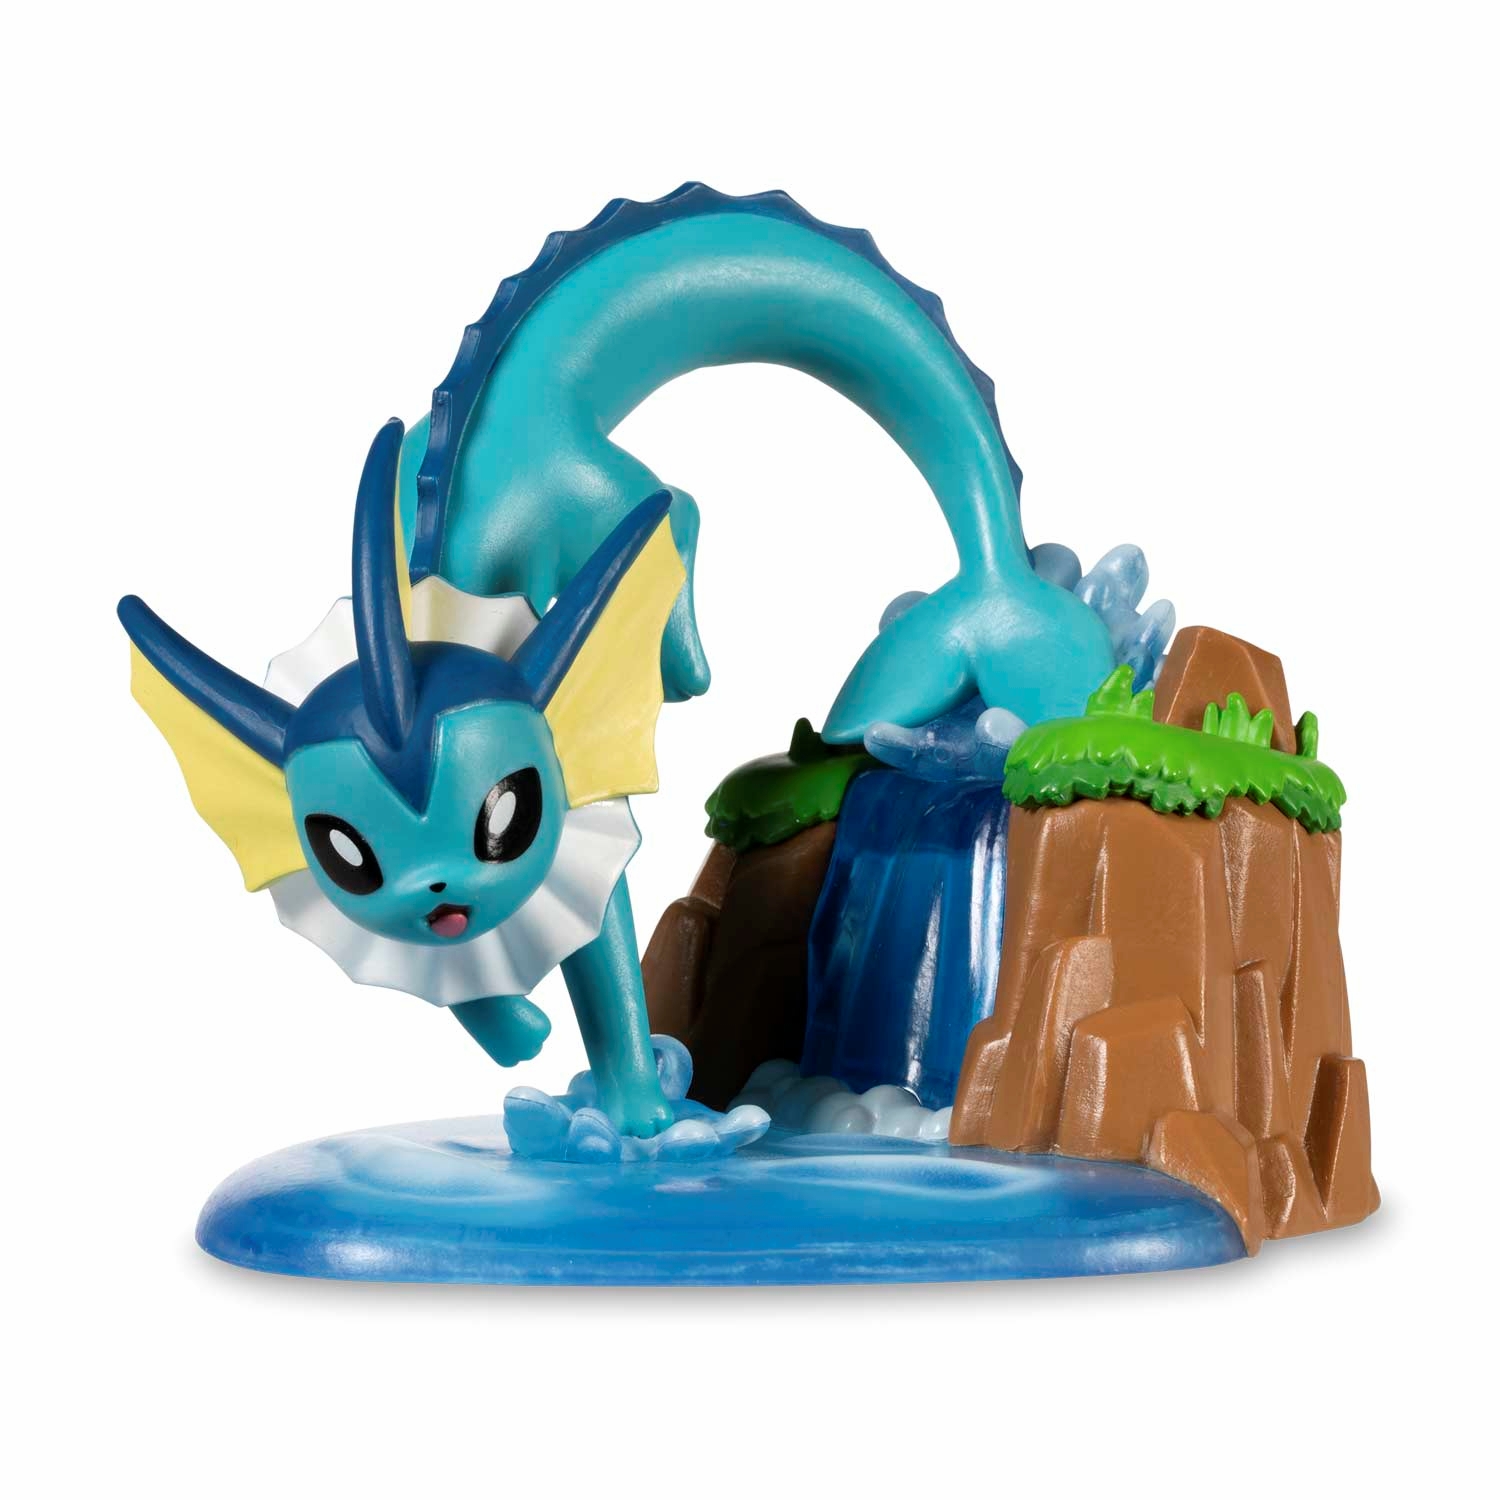 Vaporeon_Figure_An_Afternoon_with_Eevee_Friends_Product_Image.jpg